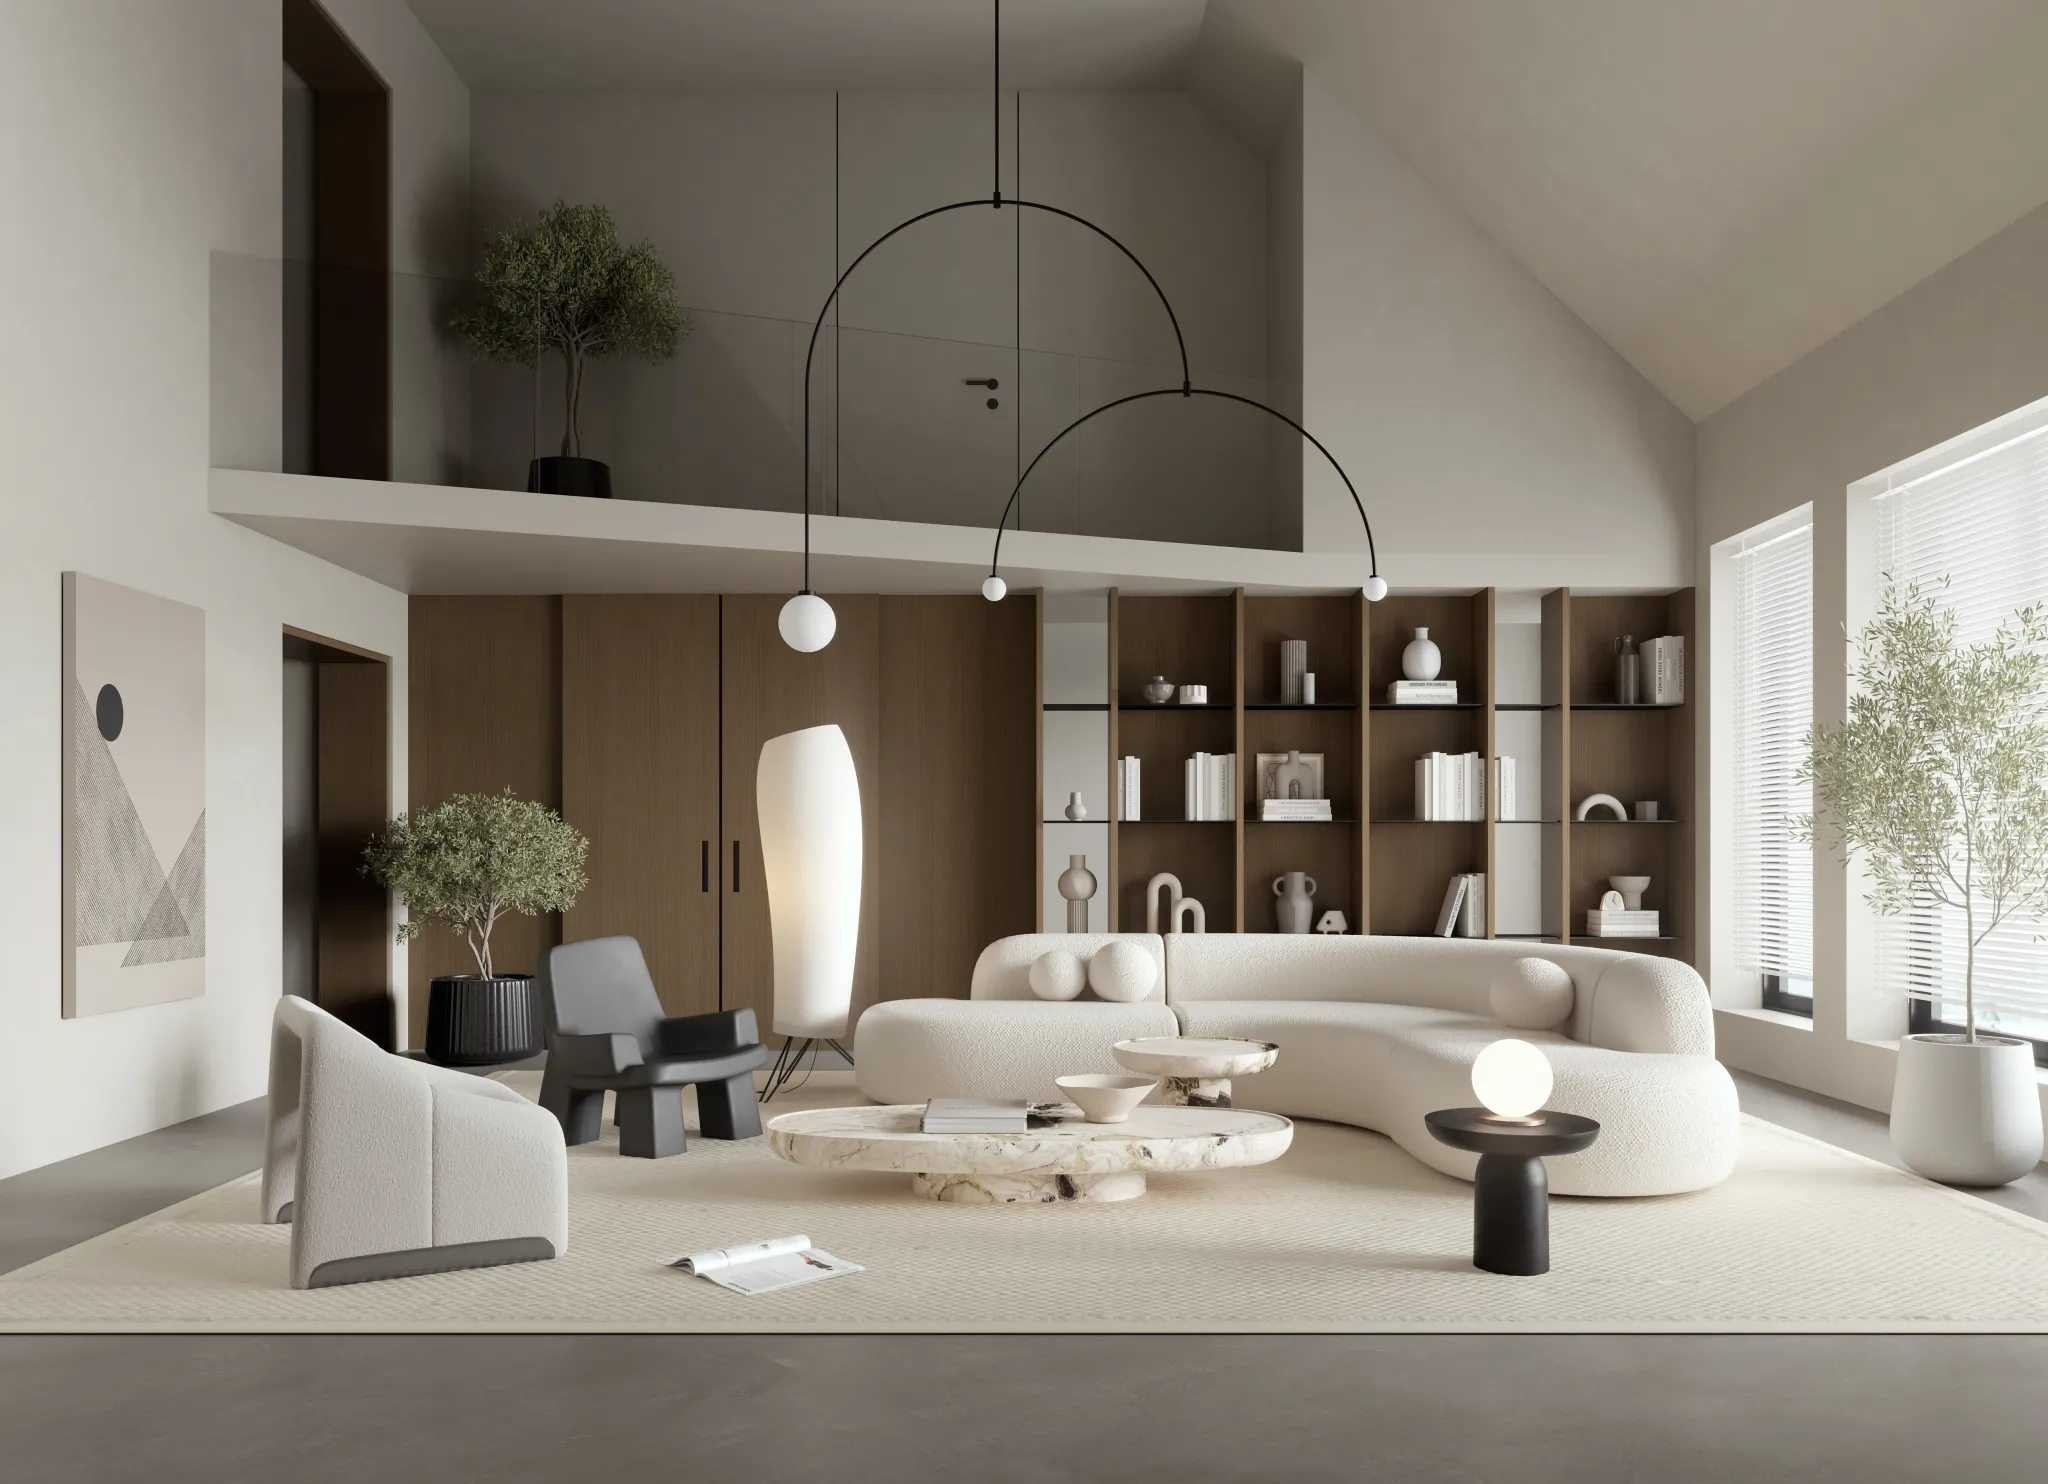 HOUSE SPACE 3D SCENES – LIVING ROOM – 0179